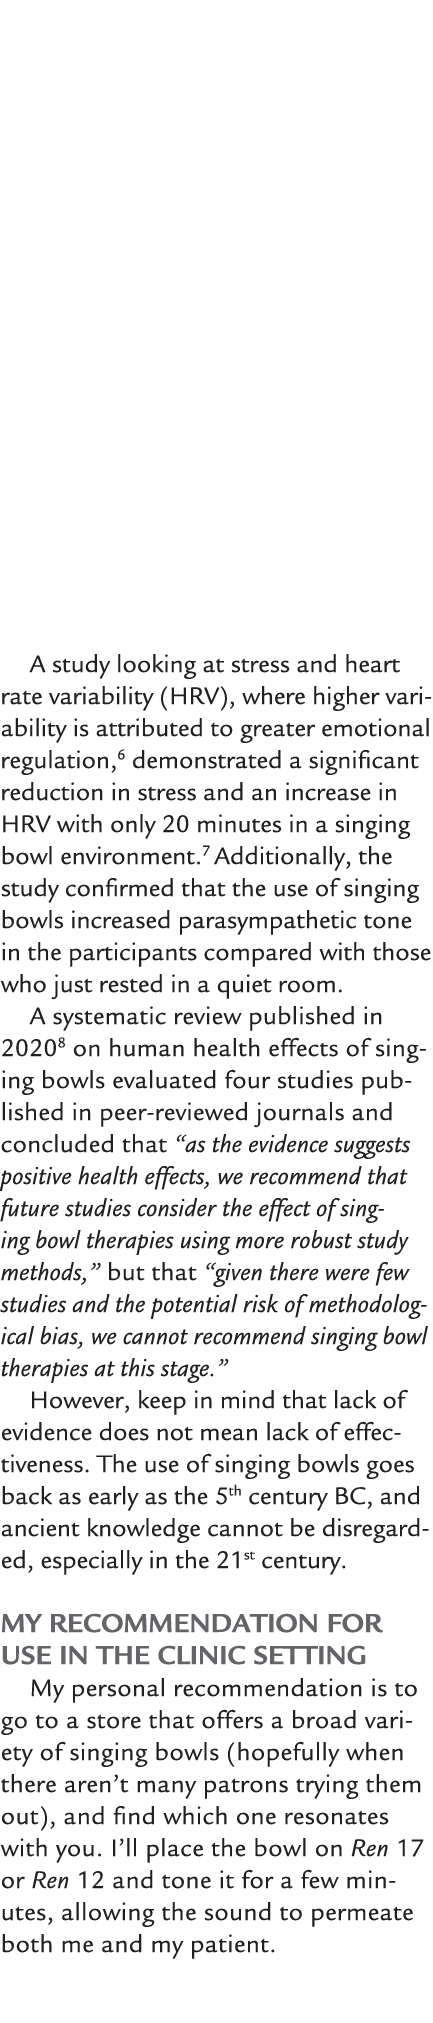 A study looking at stress and heart rate variability (HRV), where higher variability is attributed to greater emotion...